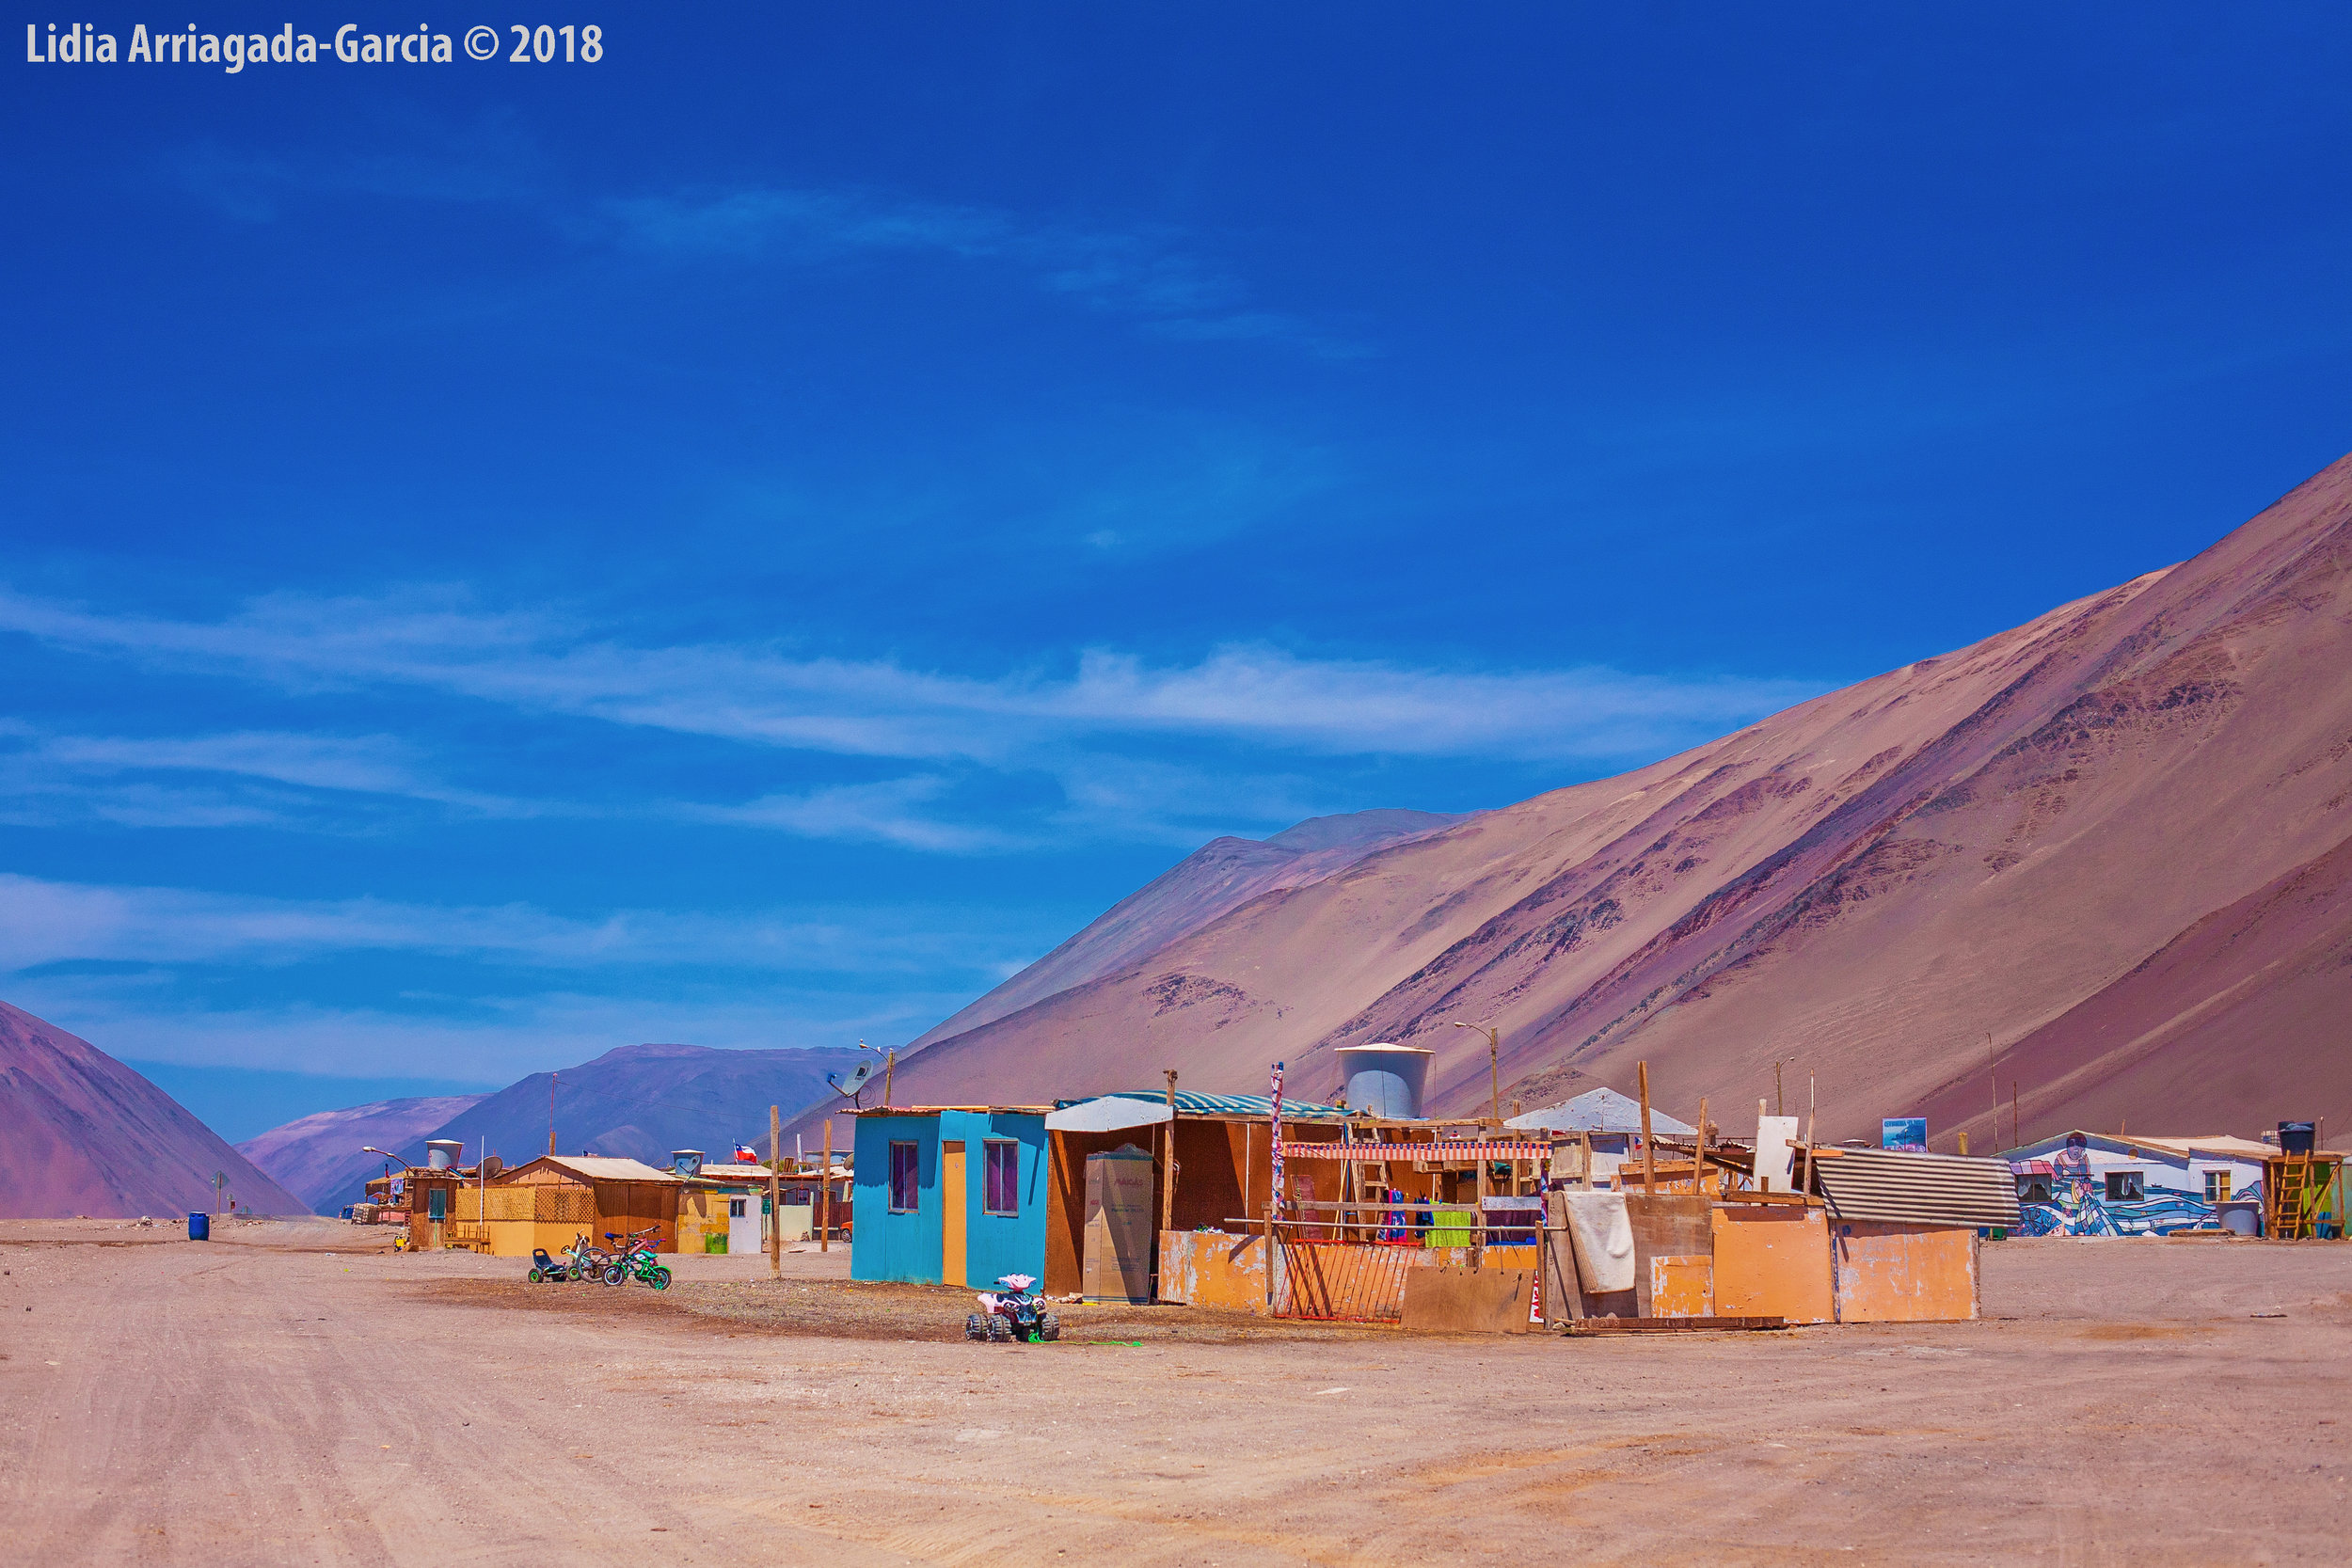 Arica, Chile by Lidia Arriagada-Garcia © 2018, All Rights Reserved, www.Lidia-AGphotography.com- 083.jpg